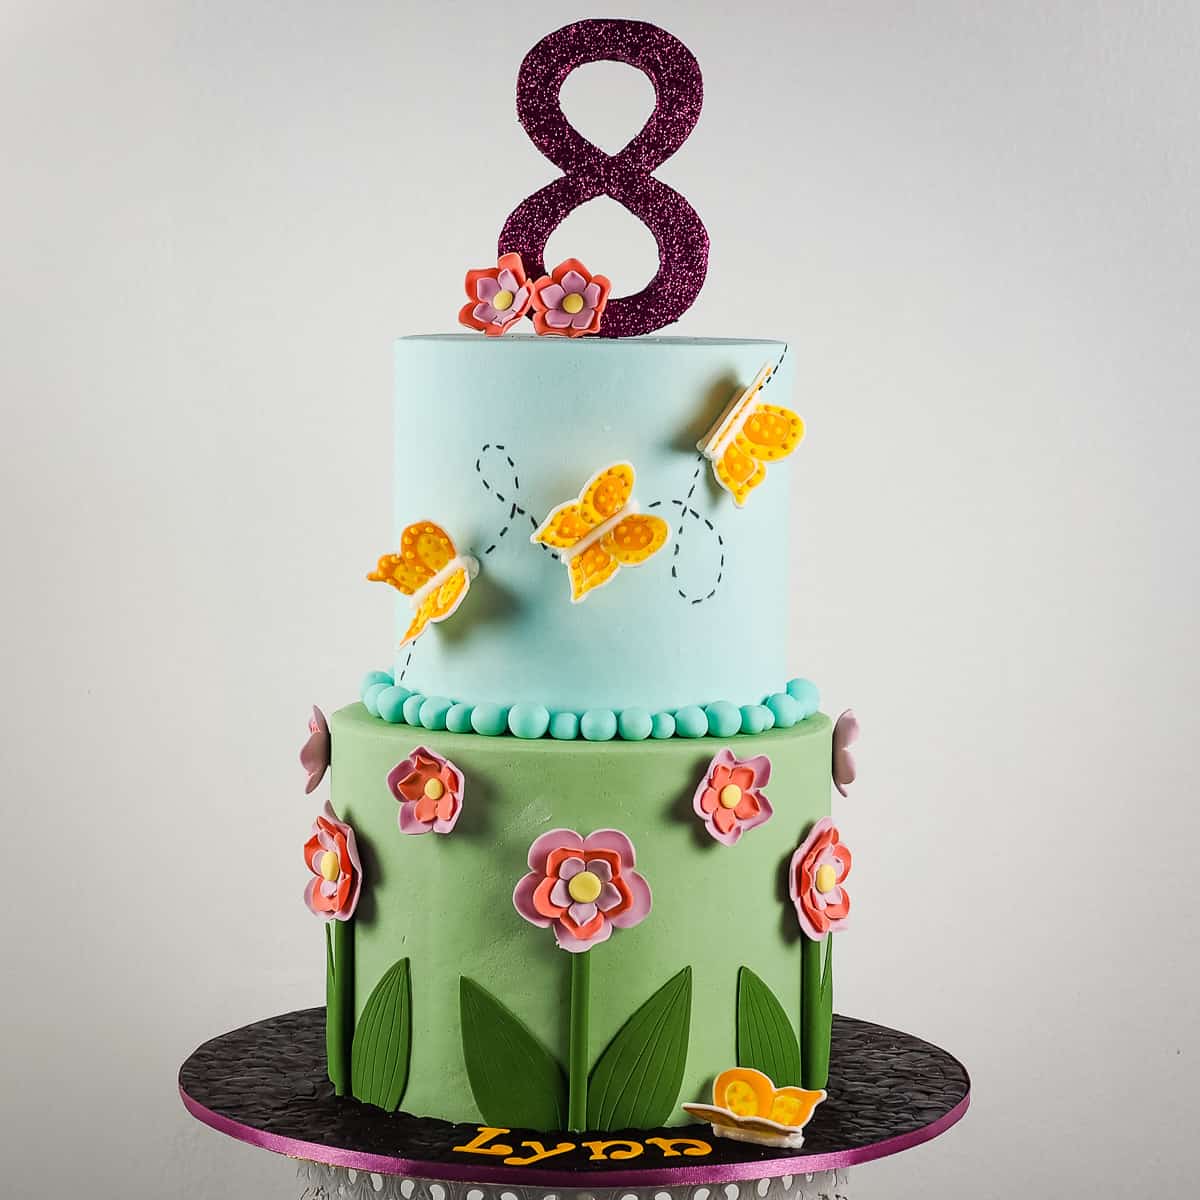 Flower Cake with Edible Butterflies for 8th Birthday